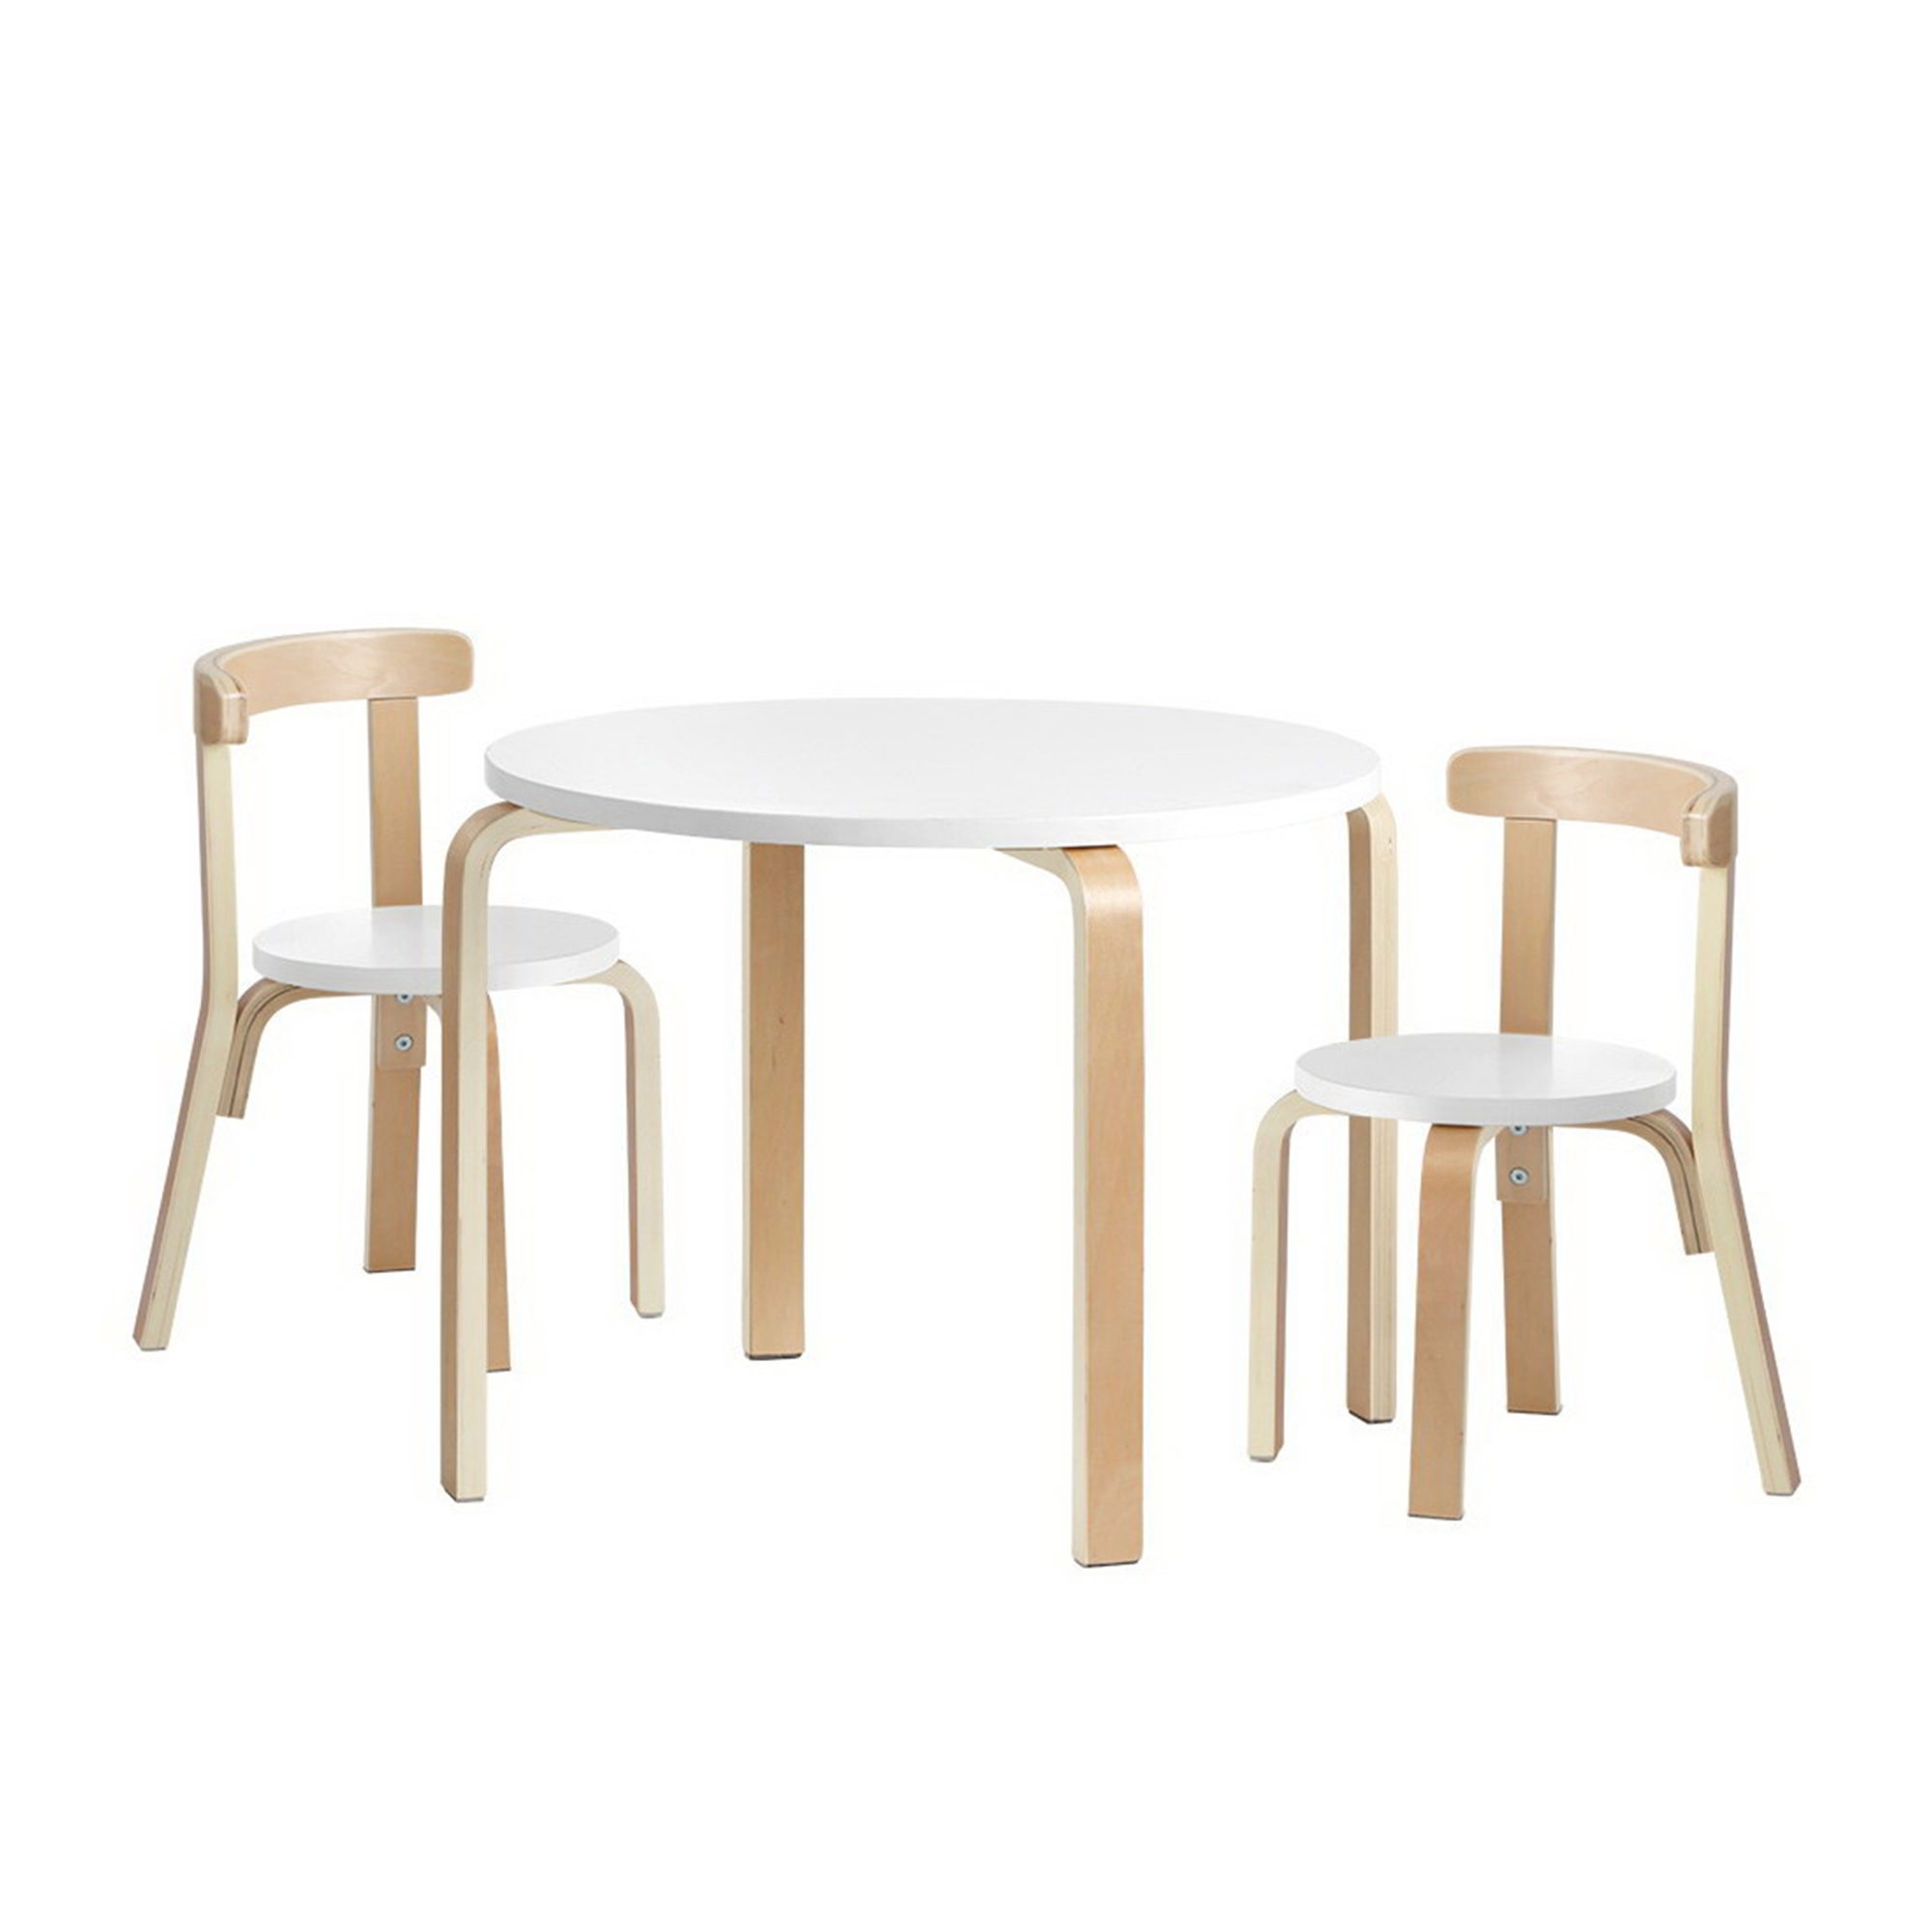 Keezi Nordic Kids Table and Chair 3pc Set Image 1